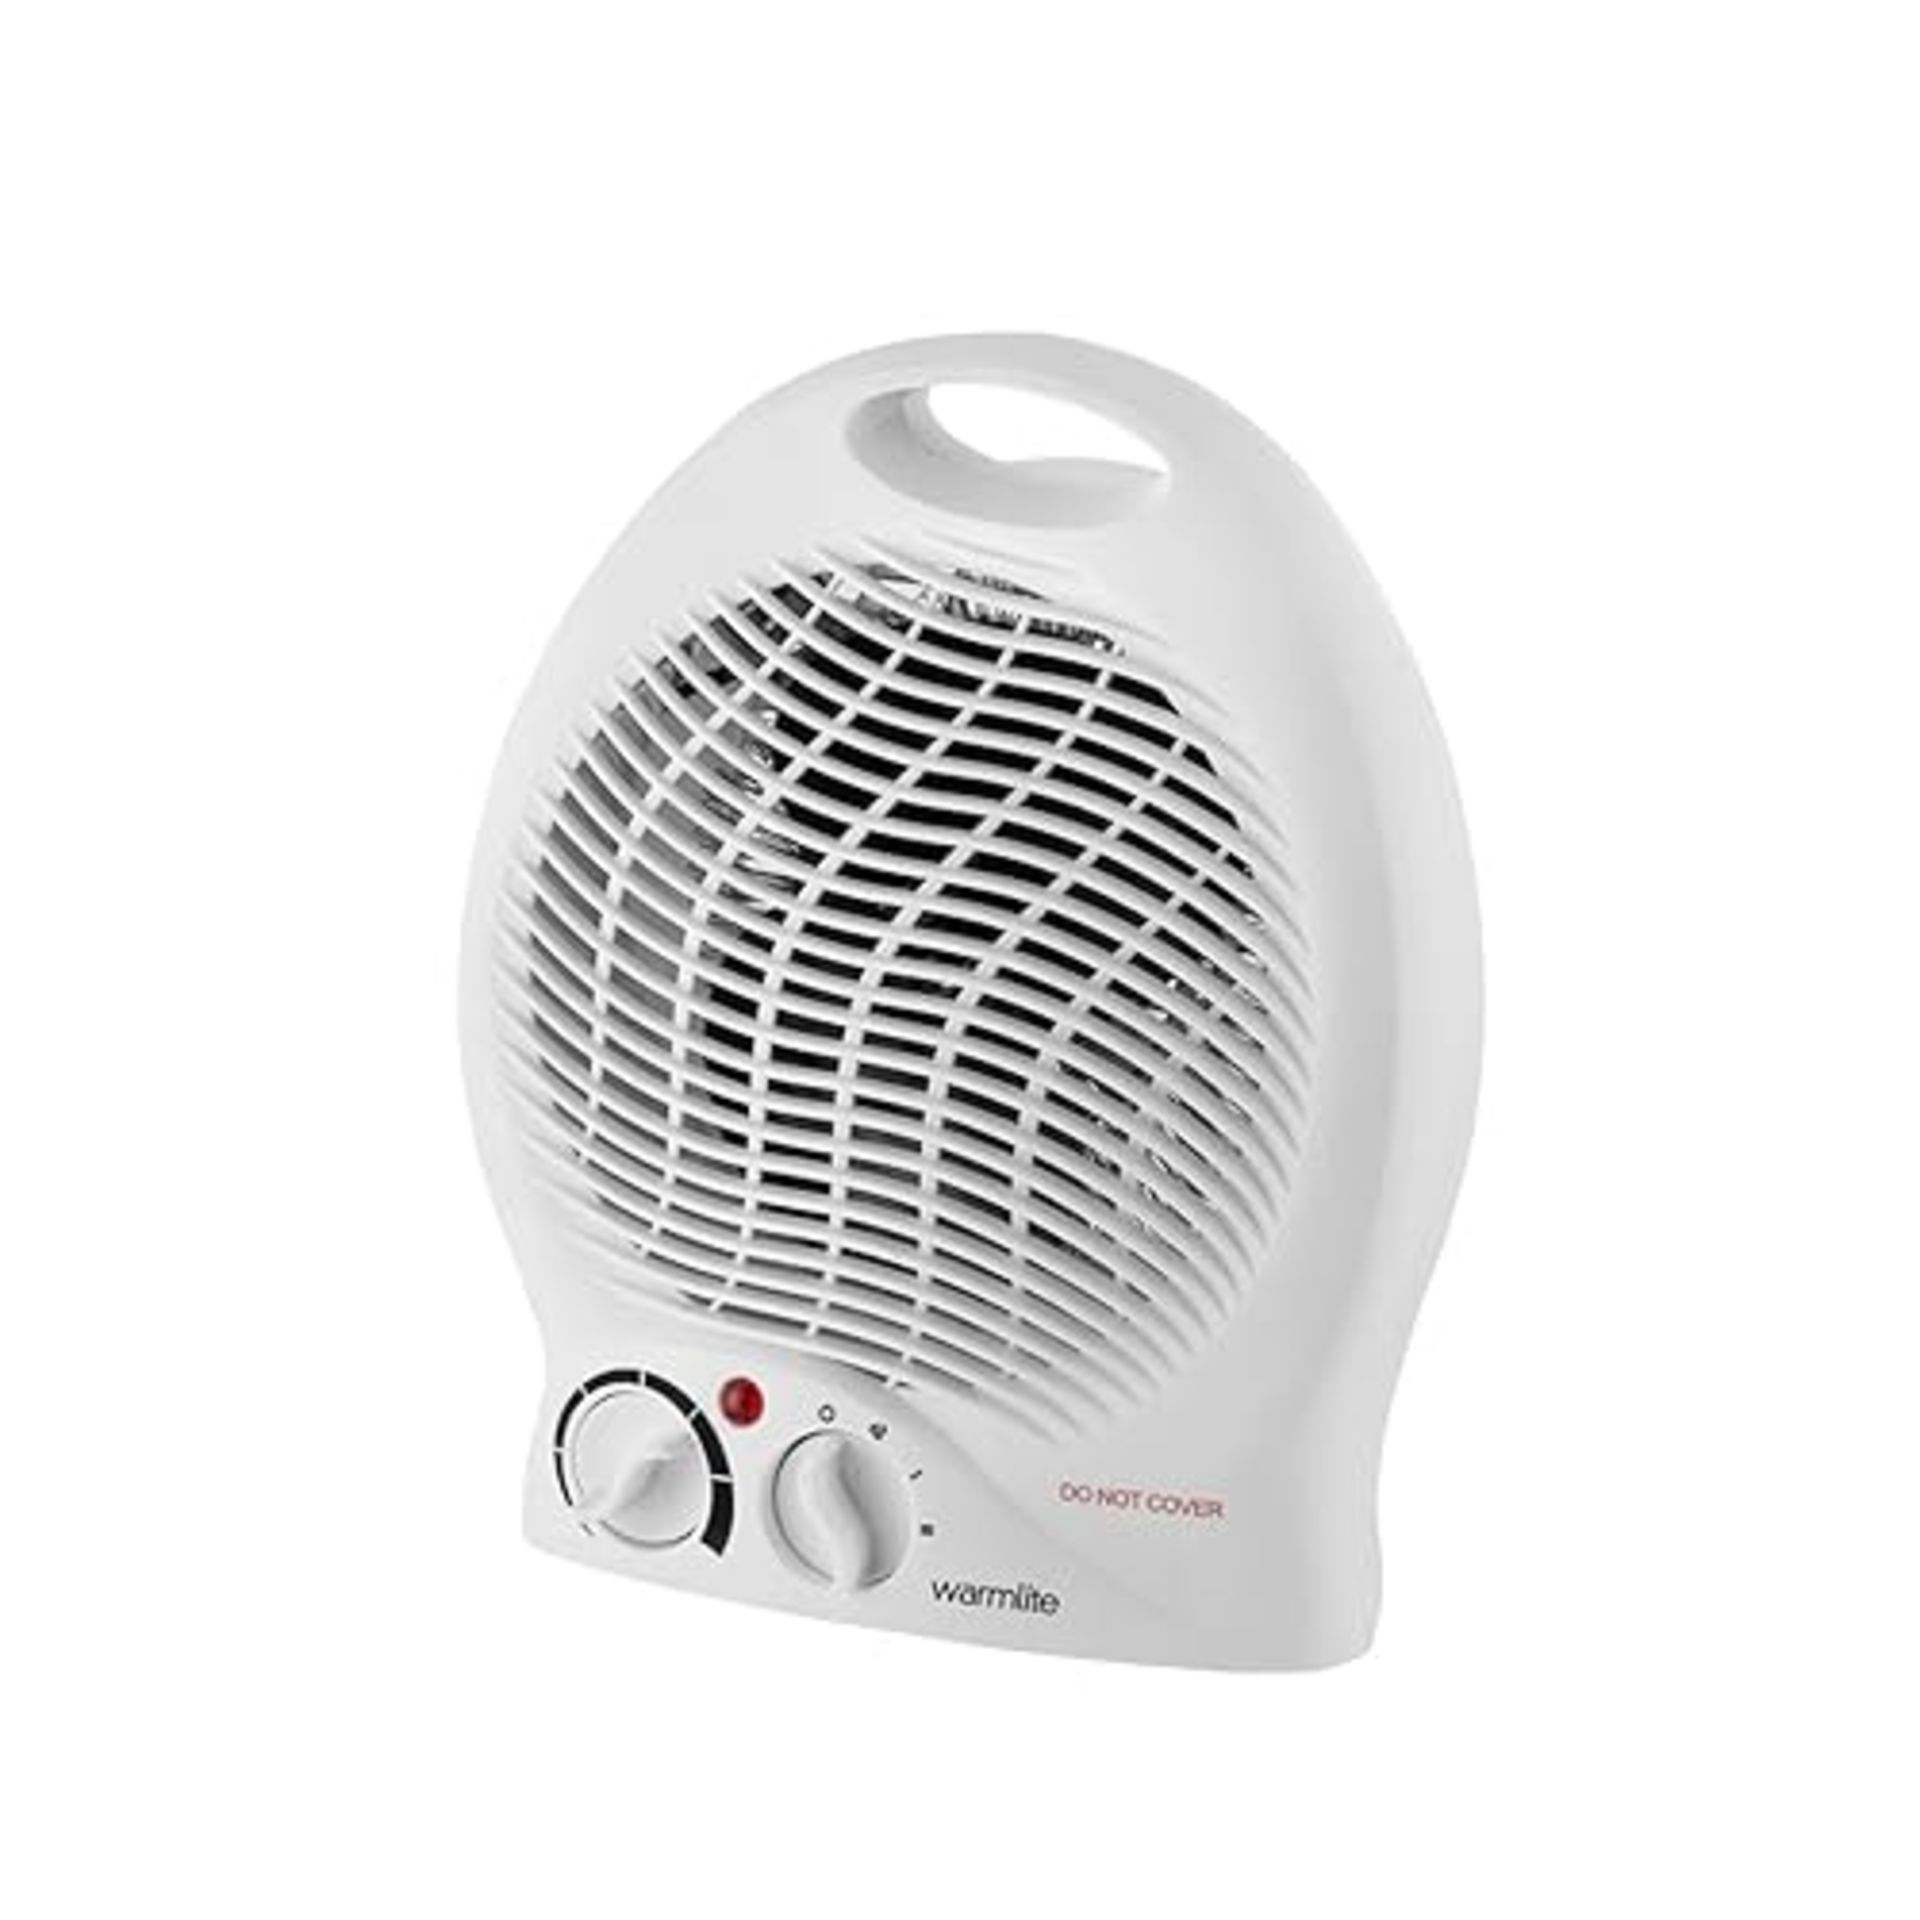 Warmlite WL44002 Thermo Fan Heater with 2 Heat Settings and Overheat Protection, 2000W, White